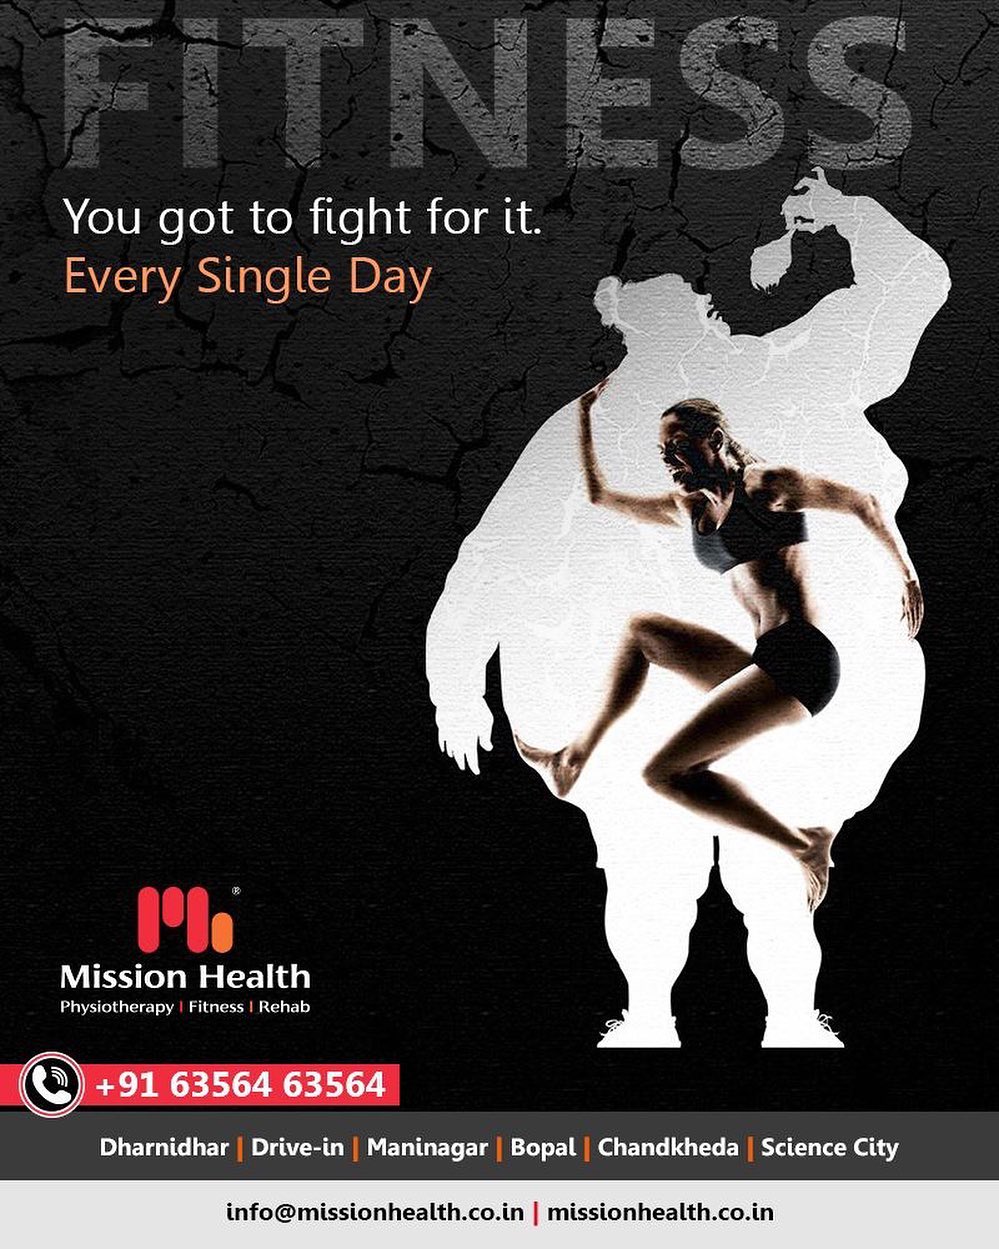 Fitness is a tiresome journey, but the results will be worth the fight! 
#Fitness #MissionHealth #MissionHealthIndia #AbilityClinic #MovementIsLife